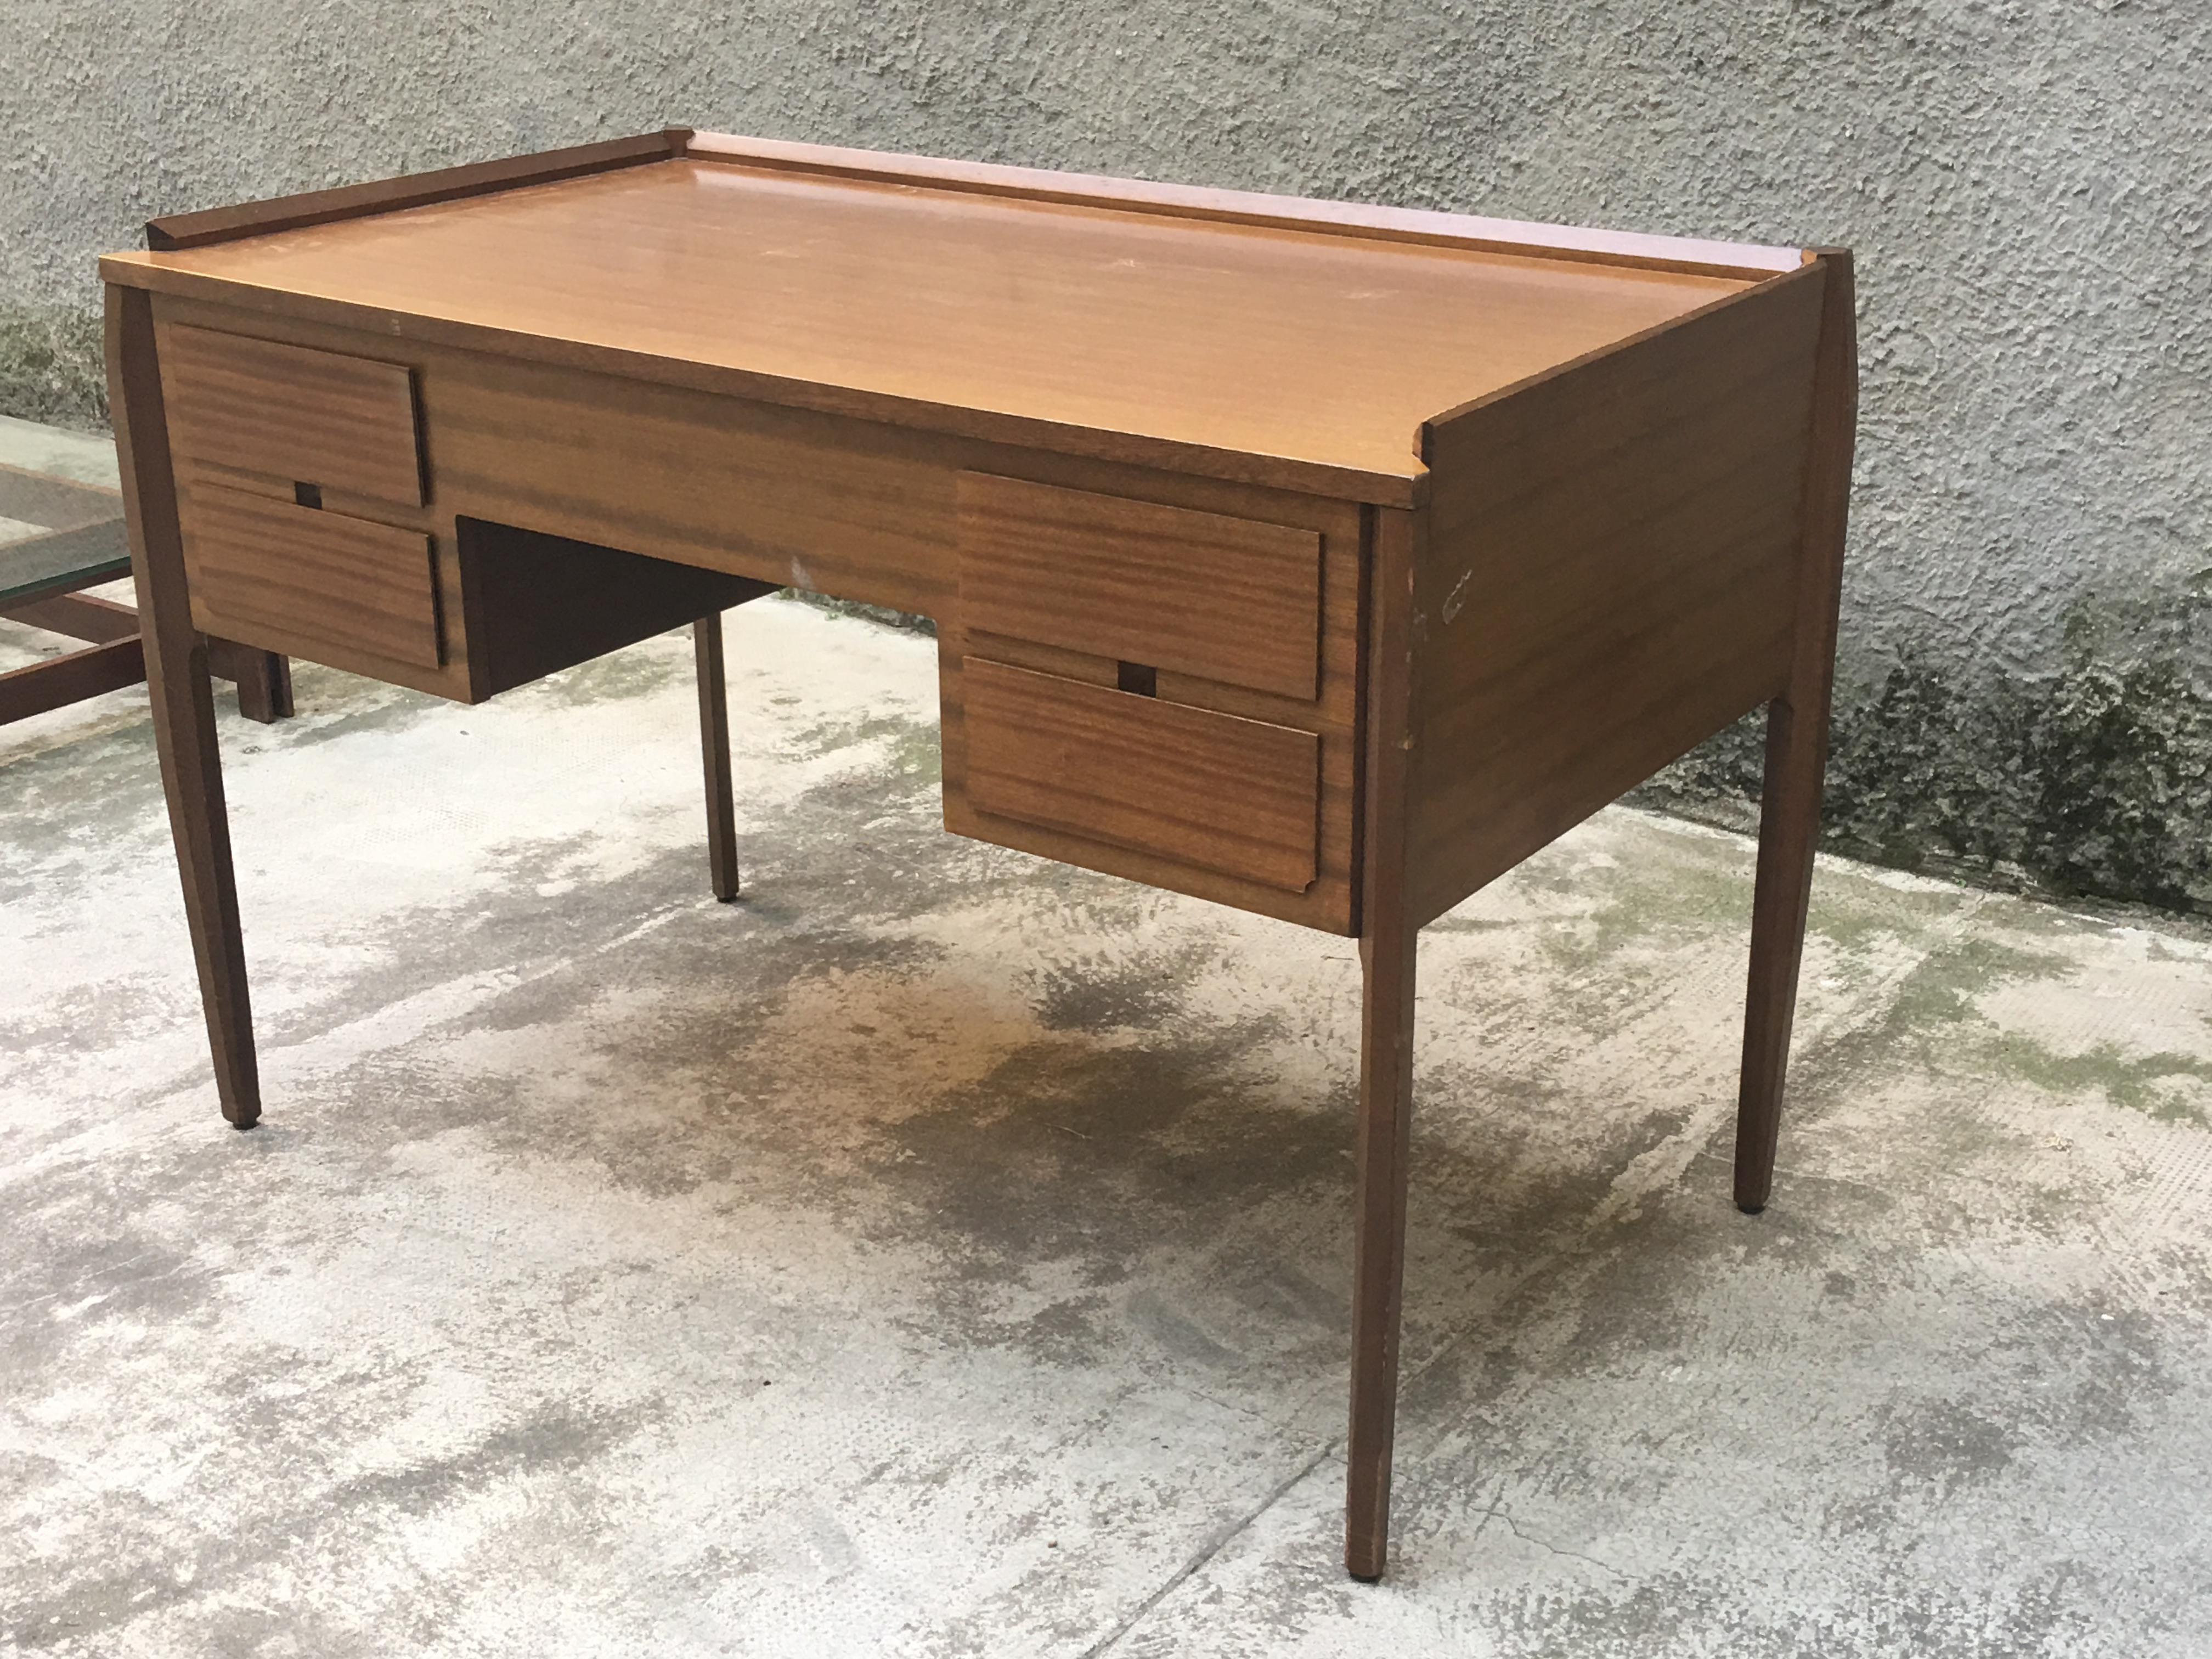 The mid-century Italian desk designed by Vittorio Dassi in the 1960s is an extraordinary example of functional elegance to the point that it is very often attributed to the work of Gio Ponti. This desk features a mix of elegant lines and fine